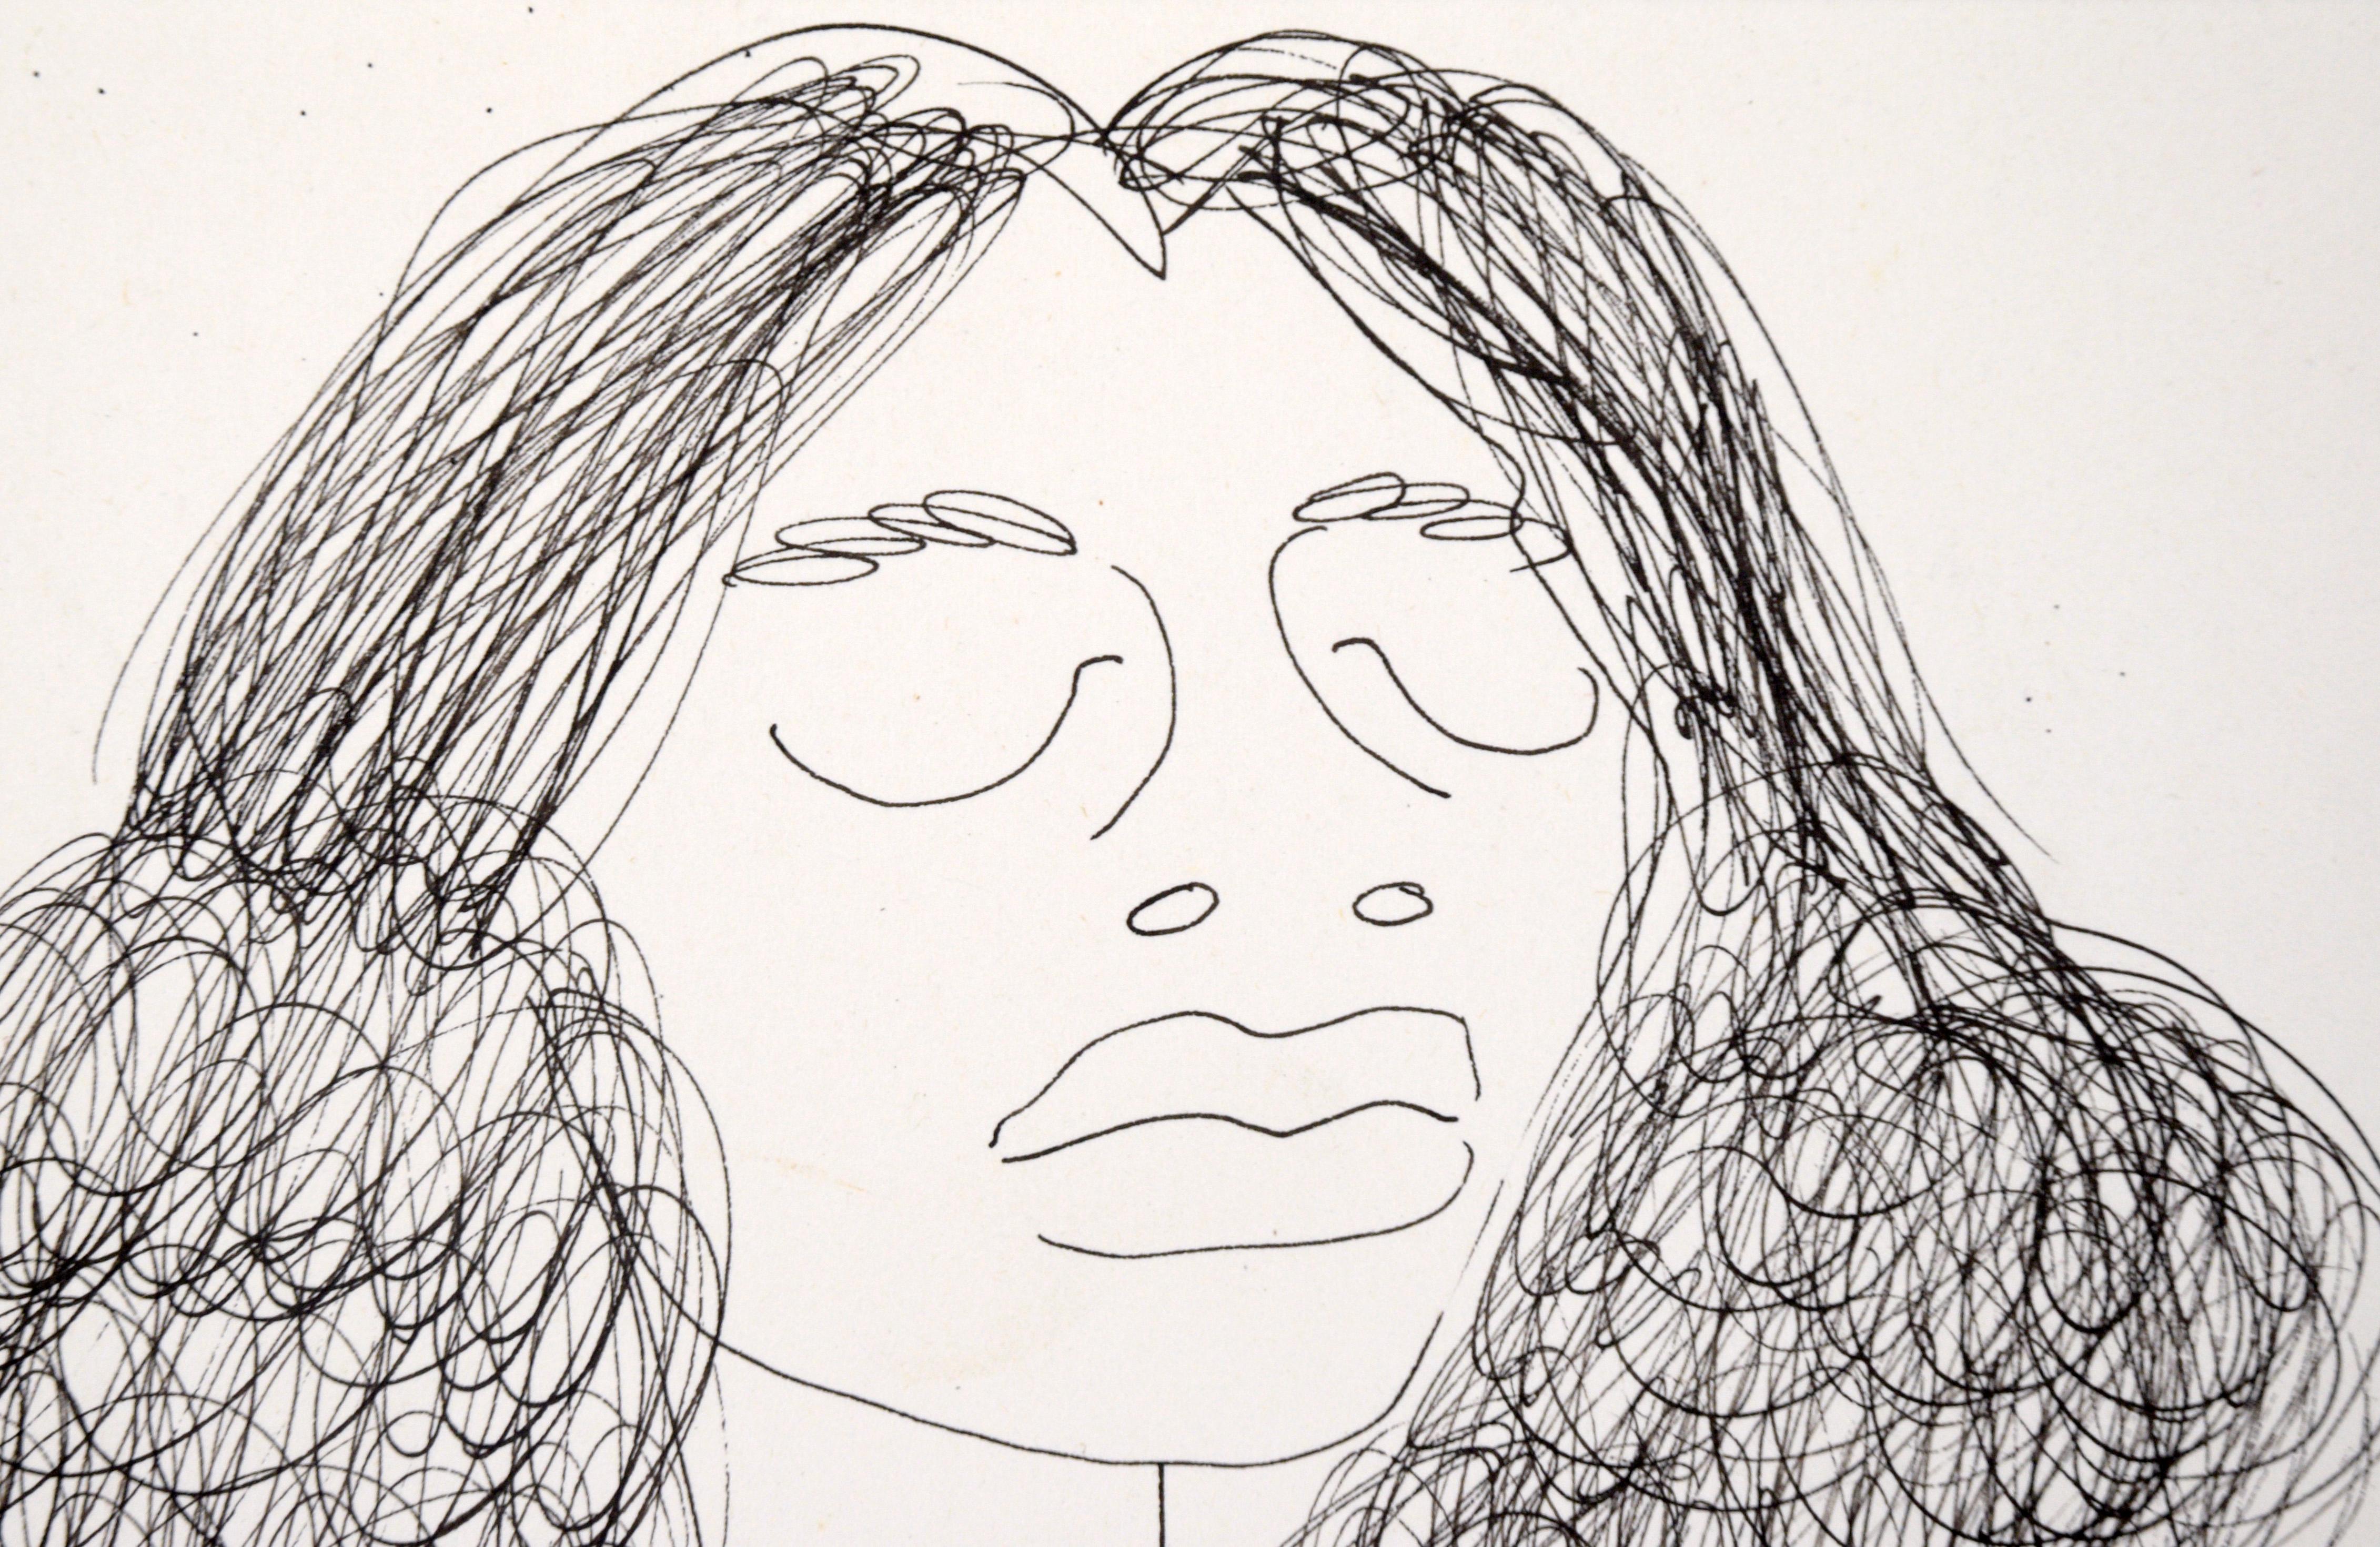 Nude Portrait of a Woman with Curly Hair - Drawing in Pen on Paper Signed 